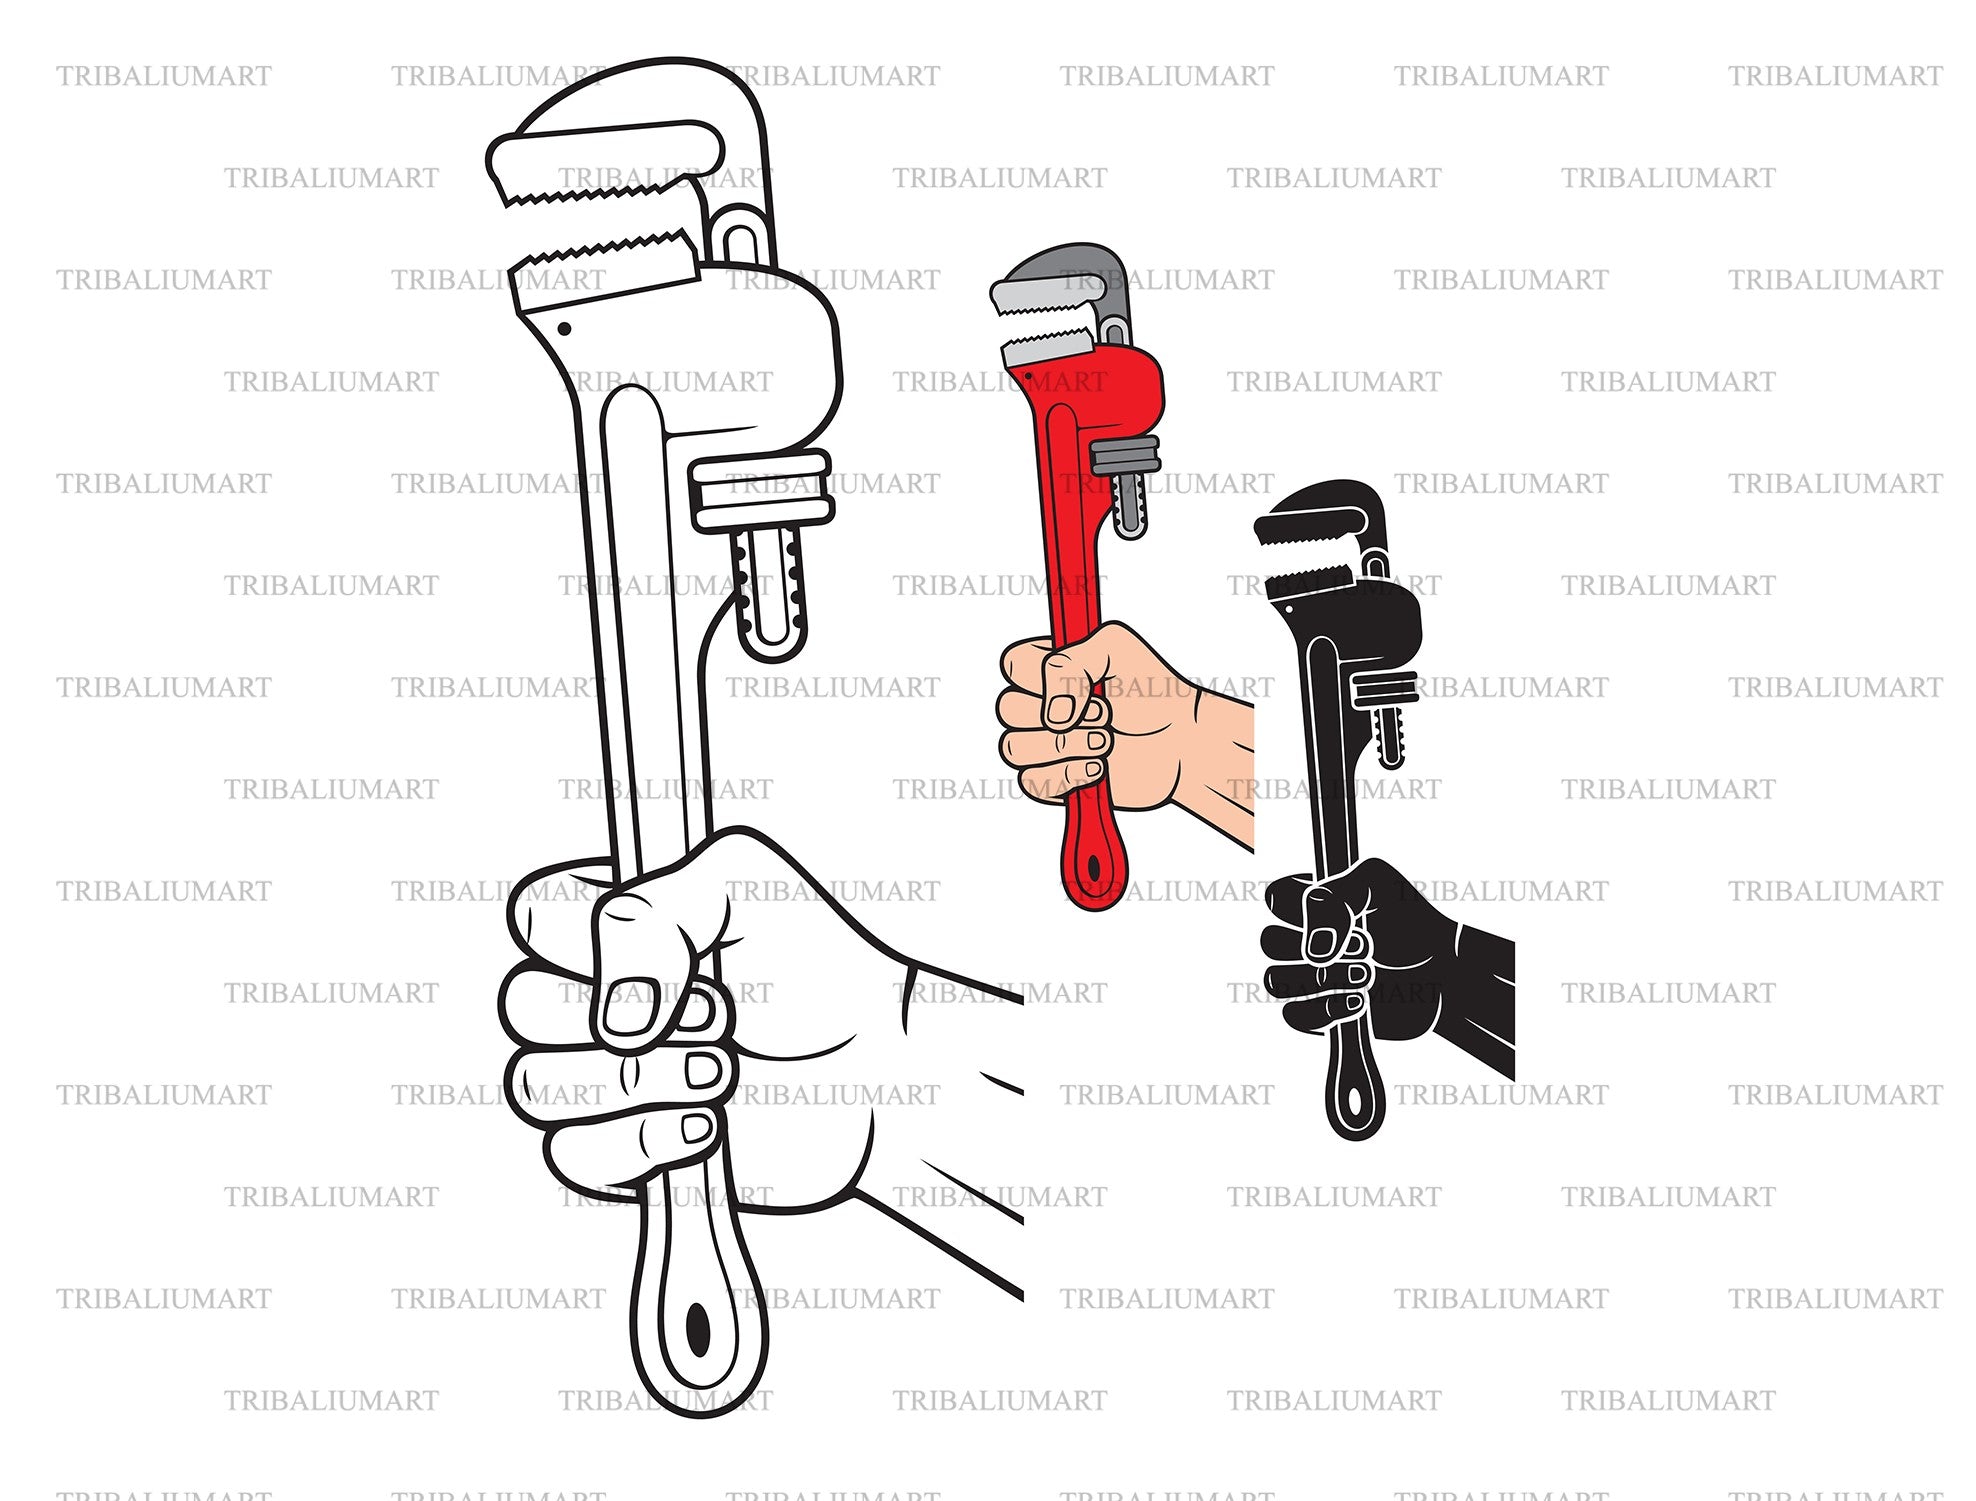 Monkey Wrench SVG, Adjustable Wrench PNG, Wrench Vector, Wrench Cut File,  Wrench Image for Cricut Silhouette Cut File, Print At Home